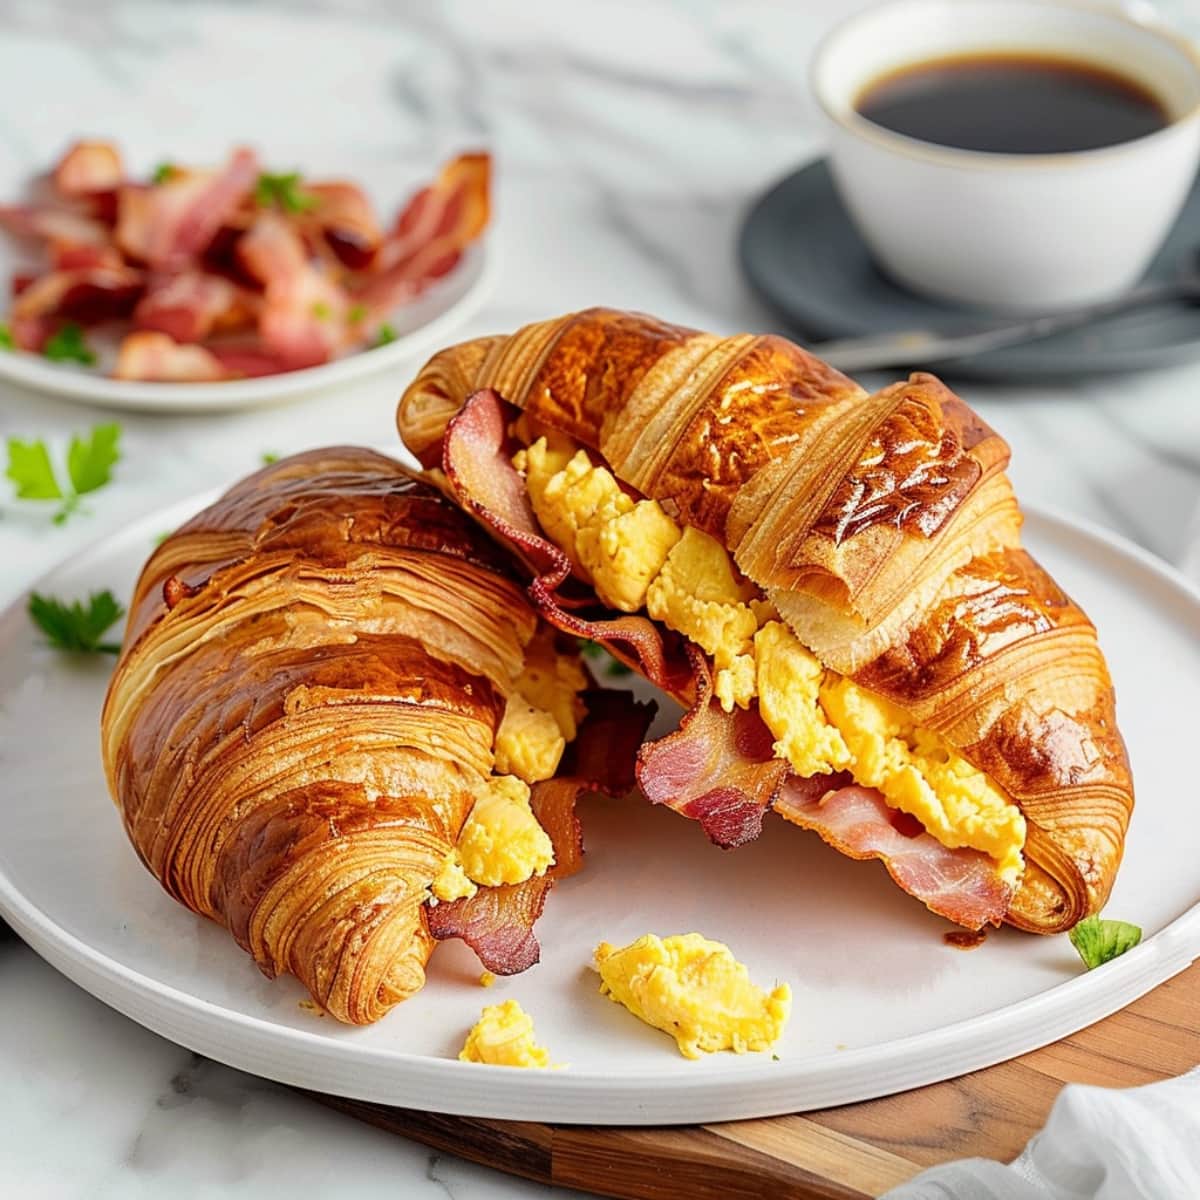 Homemade breakfast croissant with scrambled eggs and bacon, served with a cup of coffee